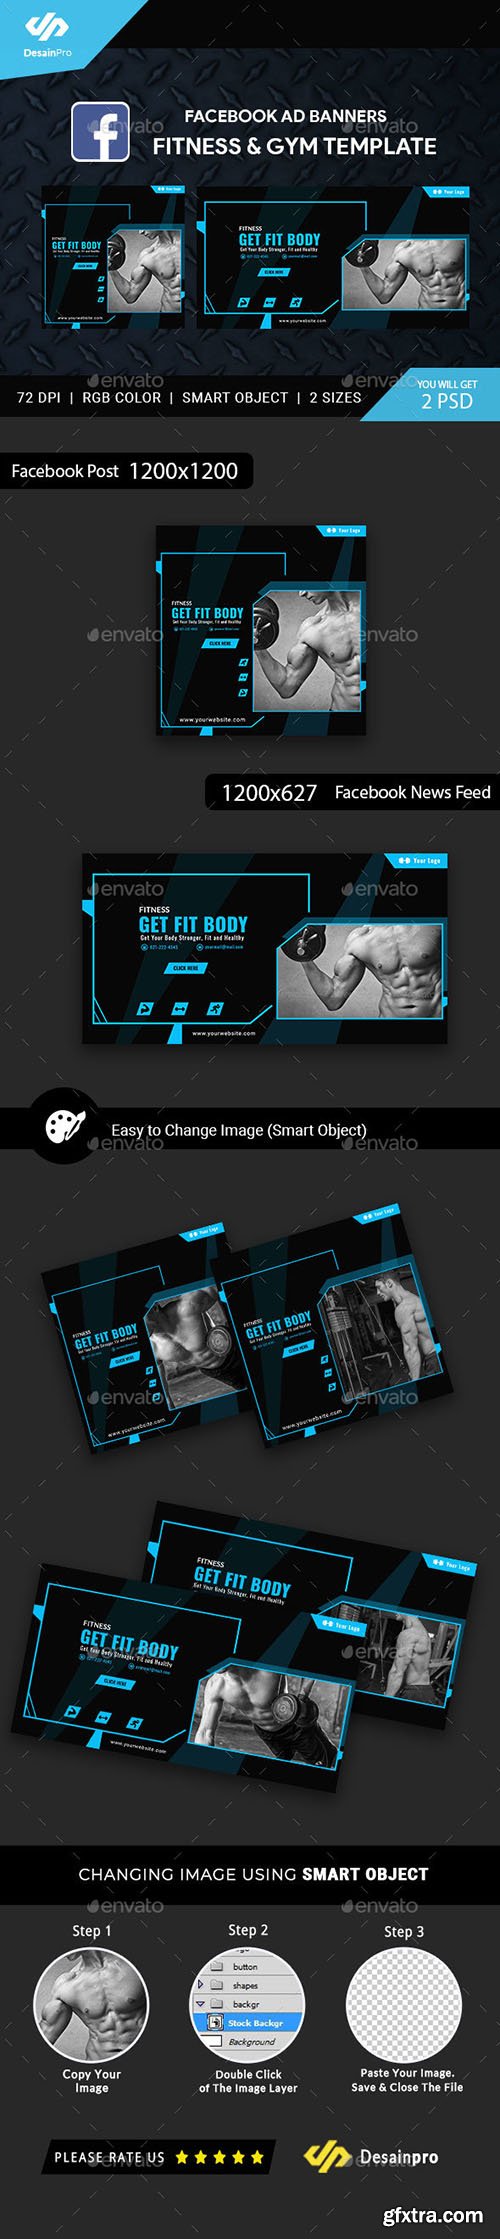 Fitness and Gym Facebook Ad Banners - AR 21548685